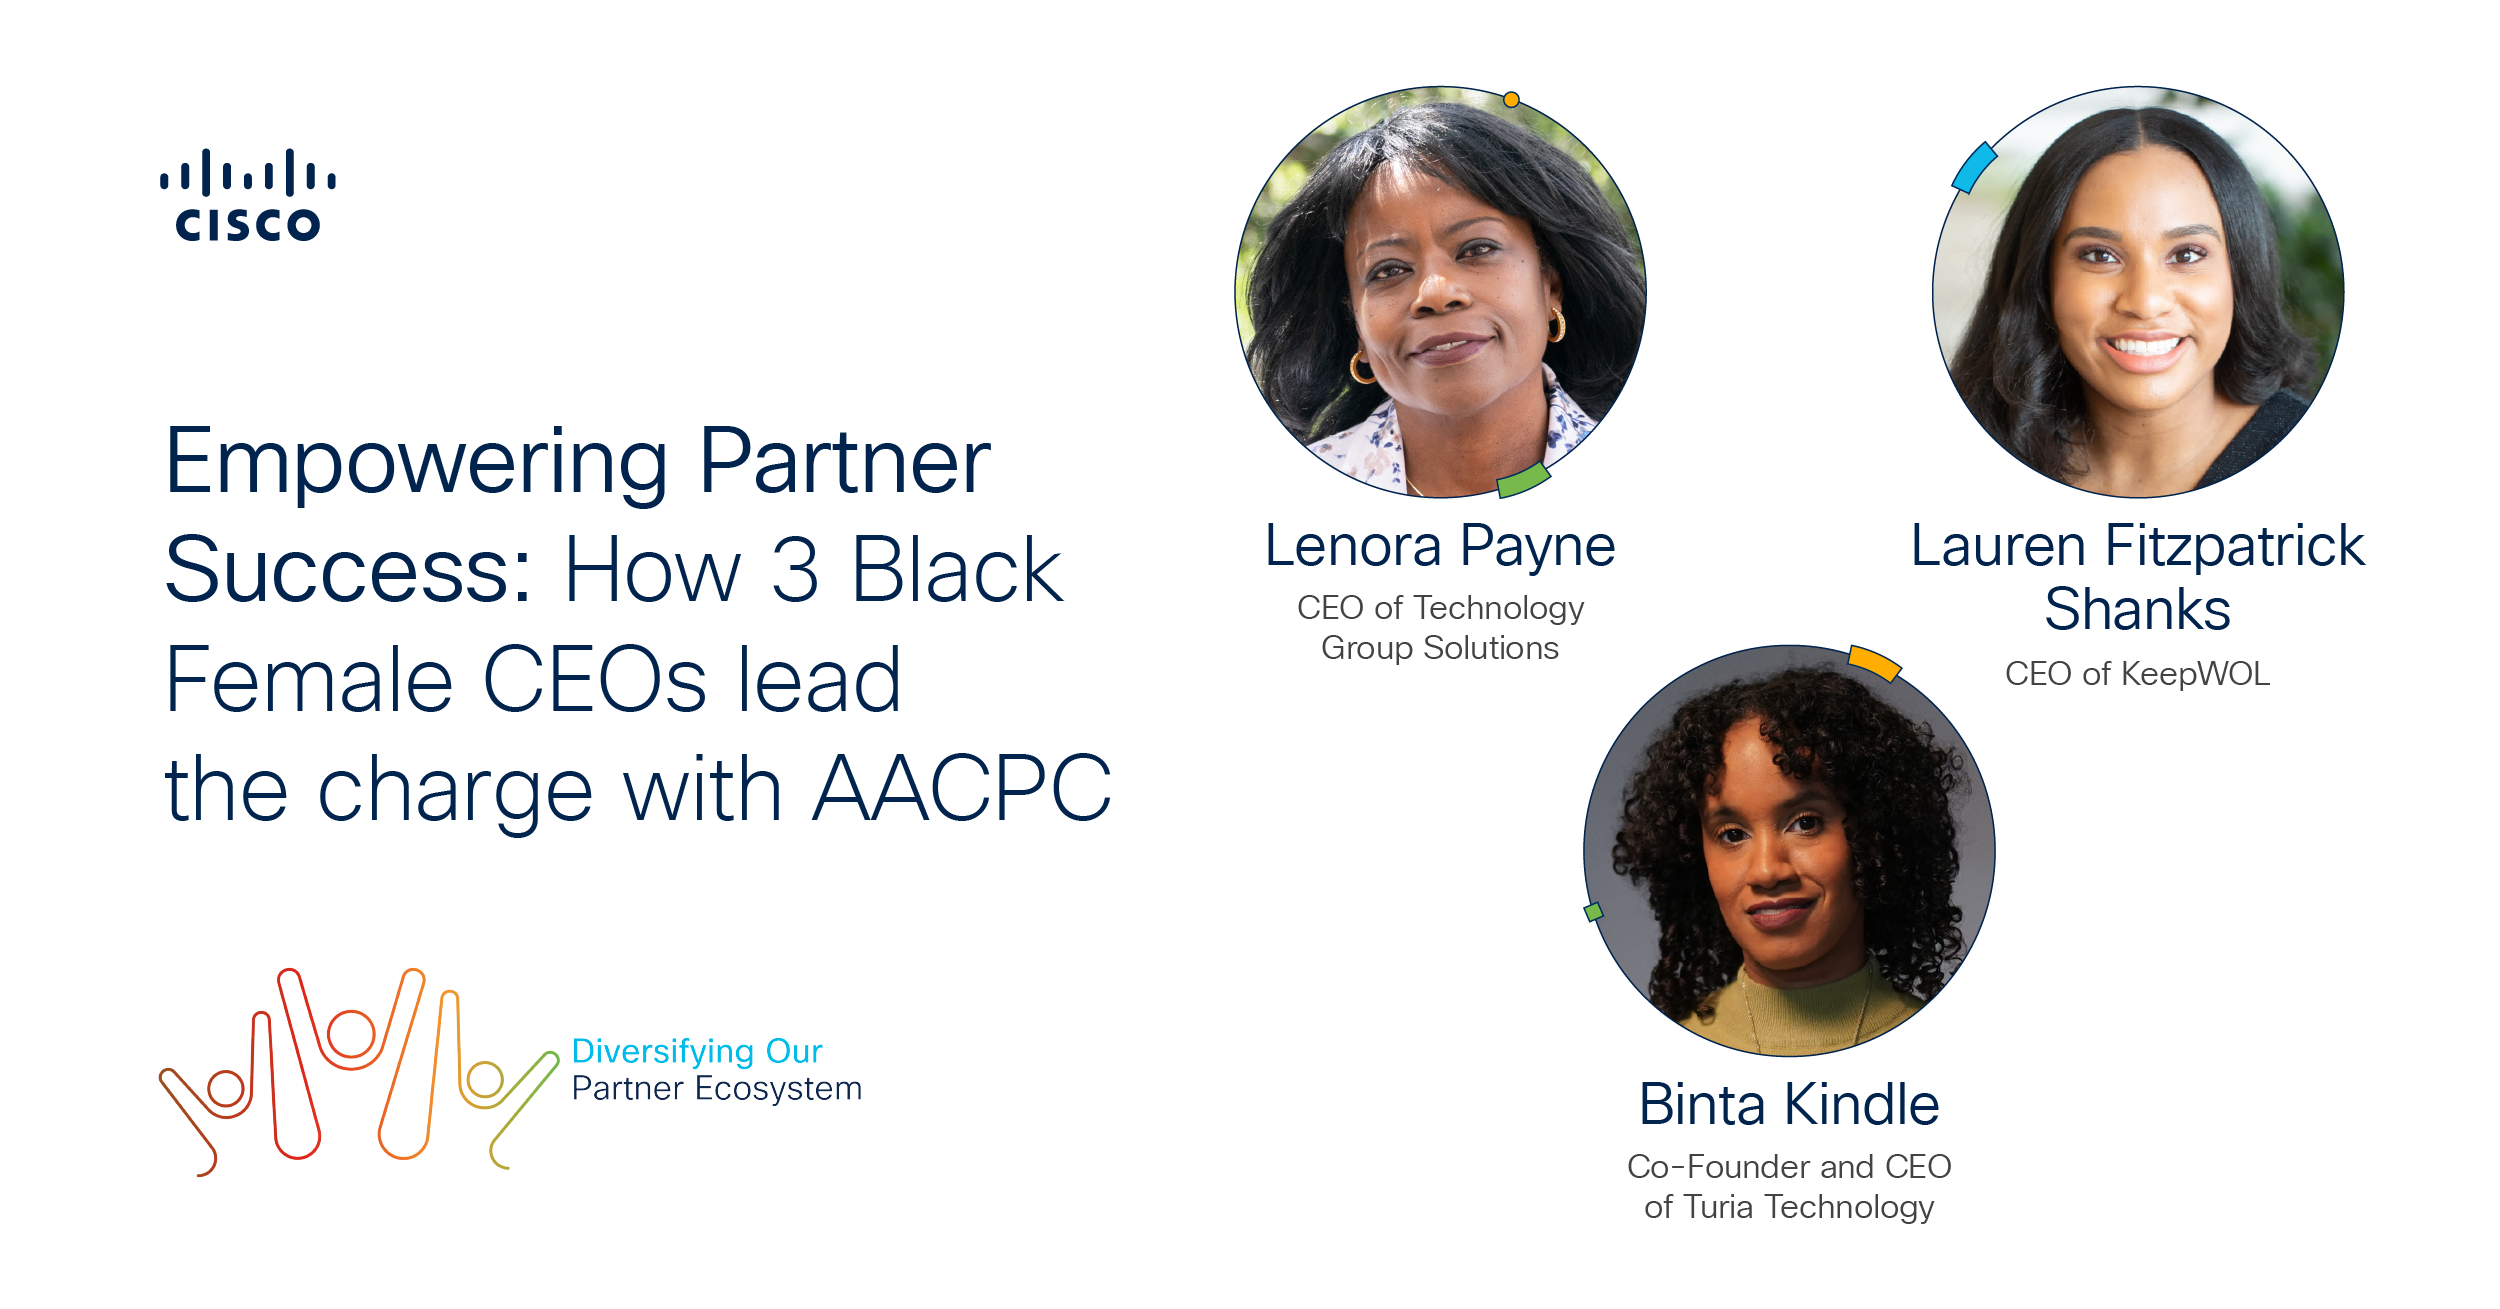 Empowering Partner Success: How 3 Black Female CEOs lead the charge with AACPC